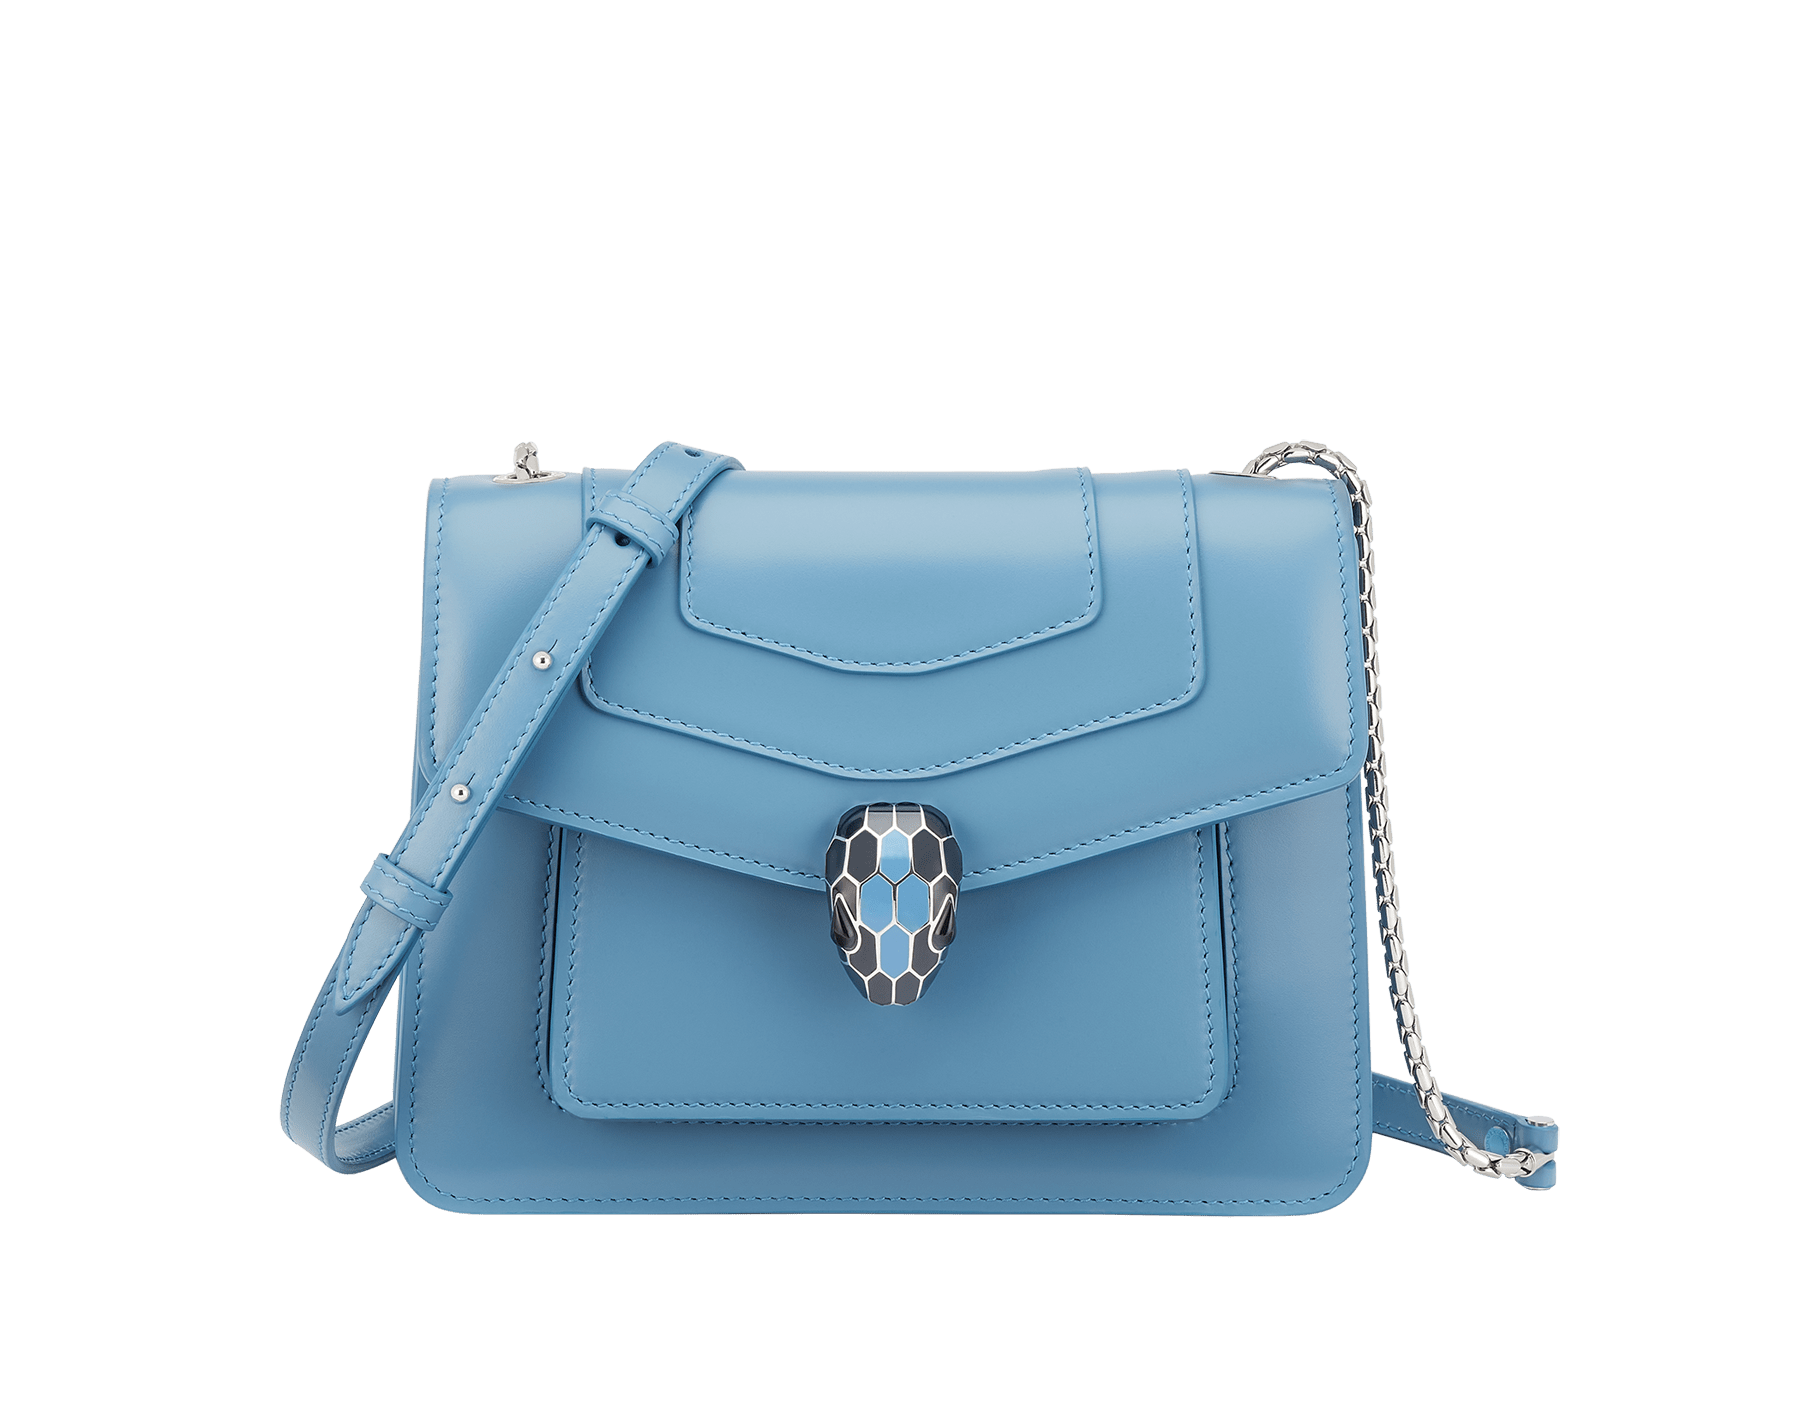 Serpenti Forever small crossbody bag in Niagara sapphire blue calf leather with silky coral pink grosgrain lining. Captivating snakehead closure in palladium-plated brass, embellished with black and Niagara sapphire blue enamel scales and black onyx eyes. 1184-CL image 1